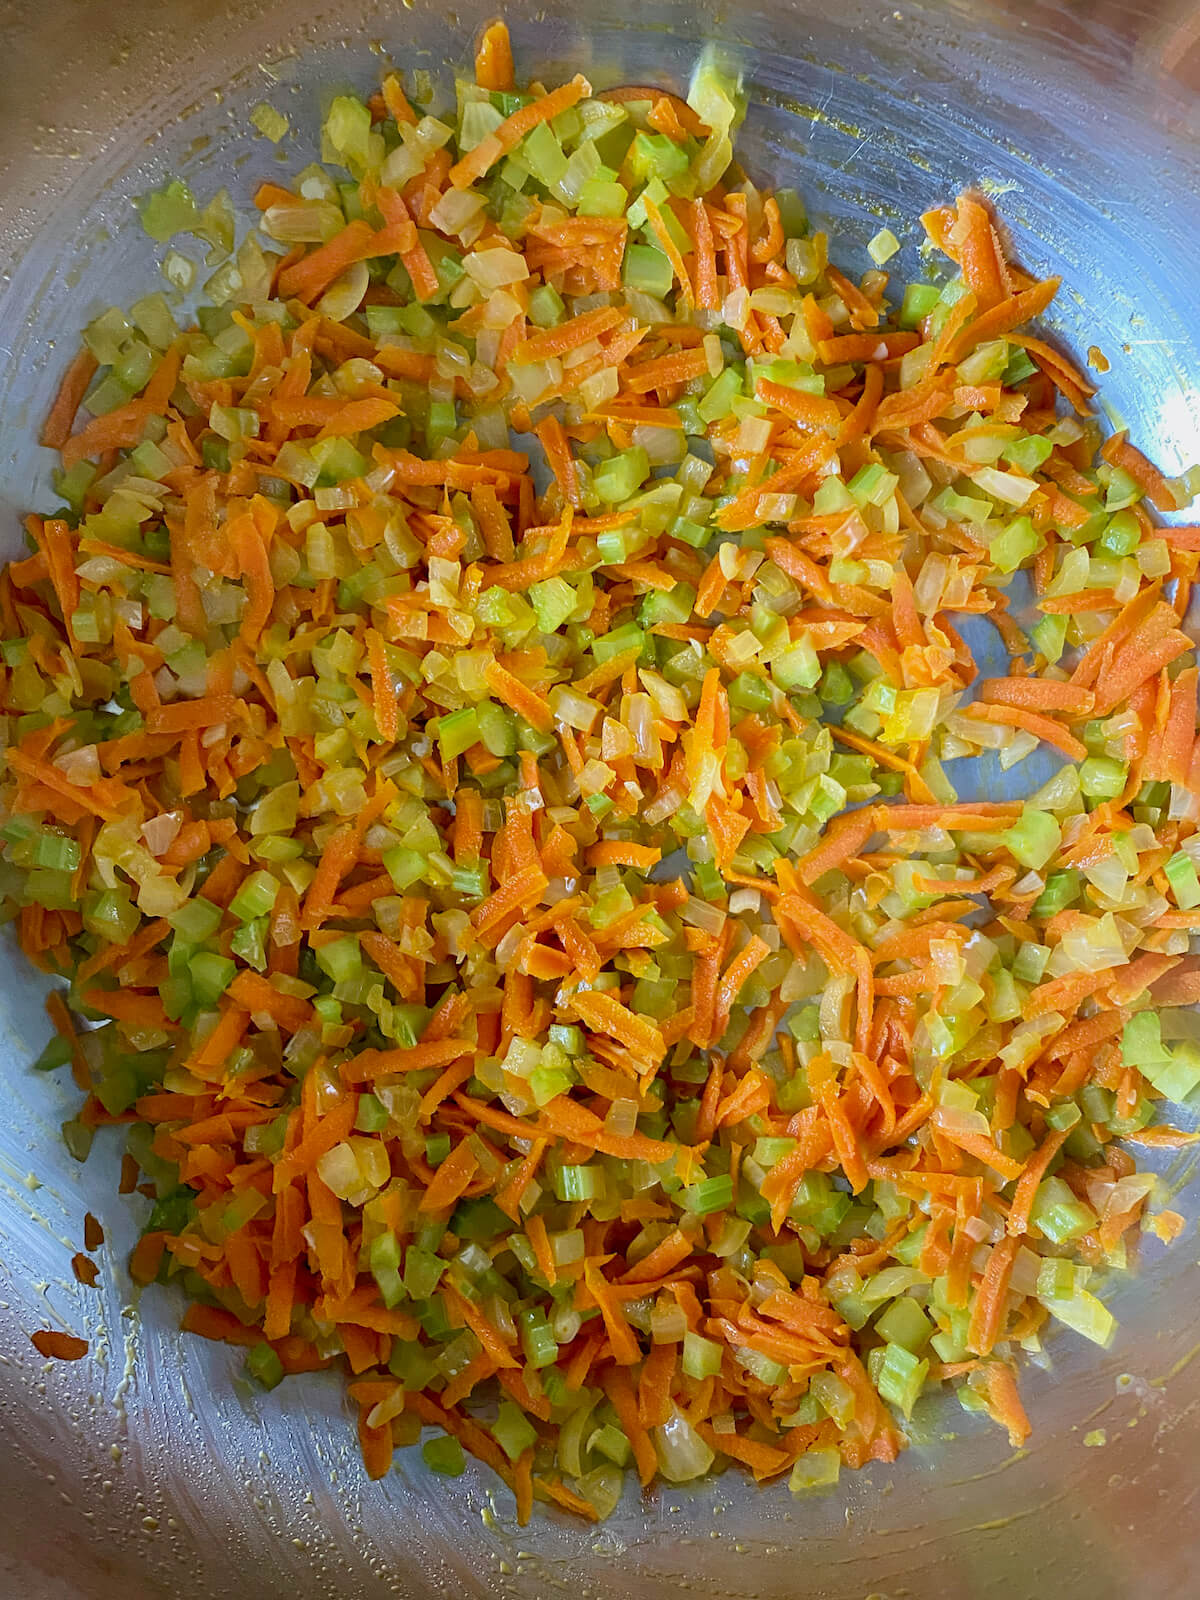 Grated carrots, diced celery, and diced onion sautéing in butter and olive oil in a stainless steel pot.